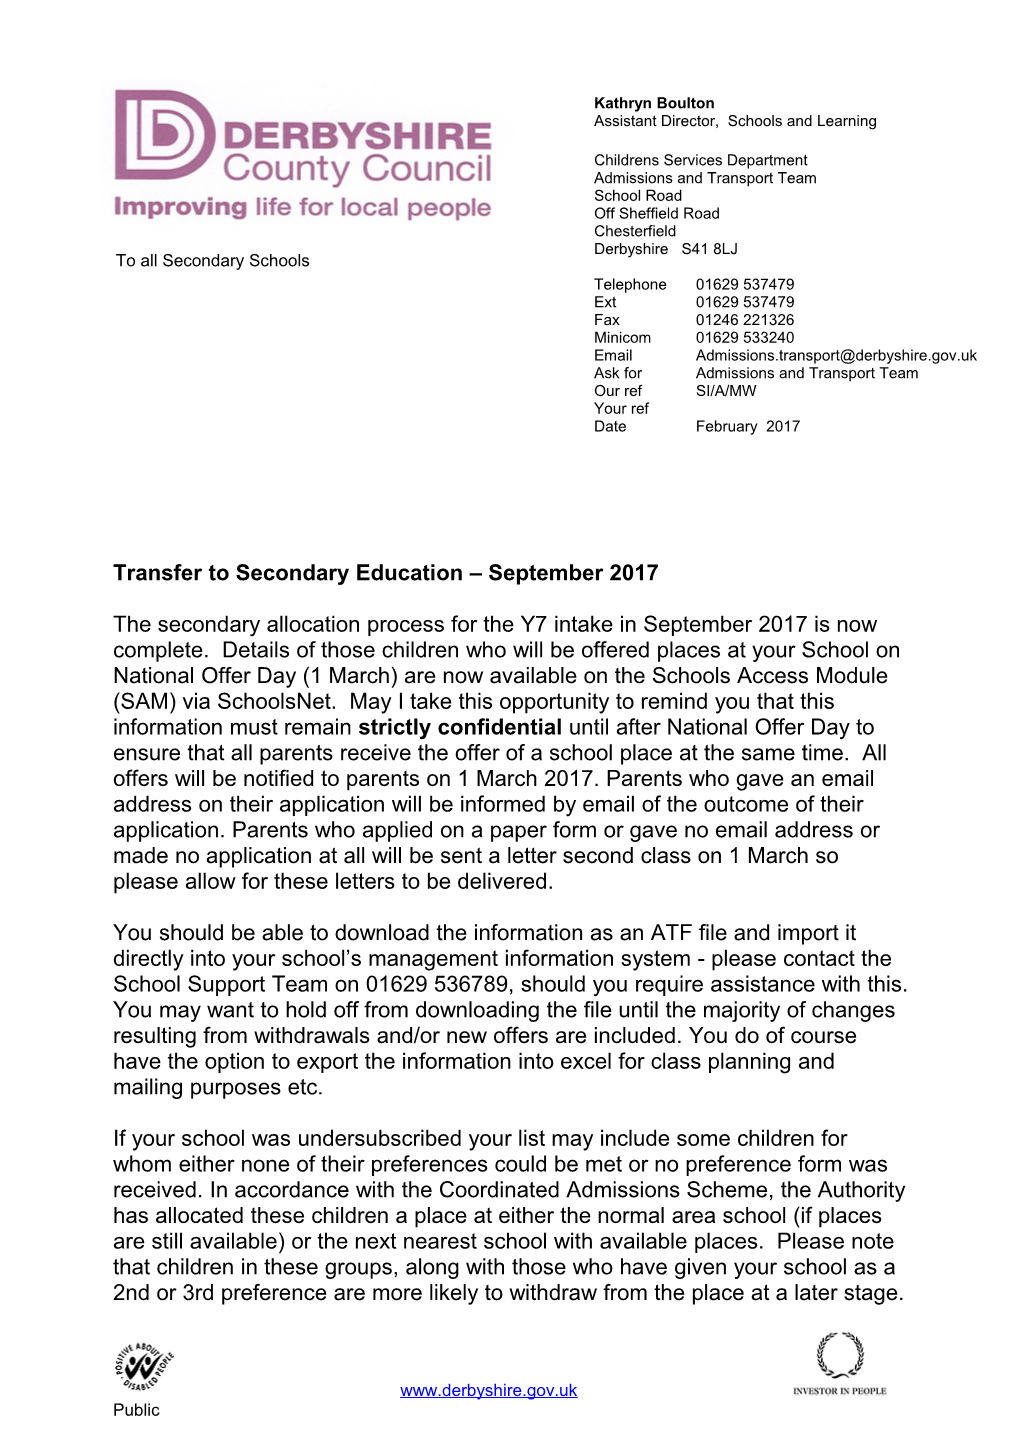 Letter Releasing Allocations to Schools - Secondary Schools - February 2017